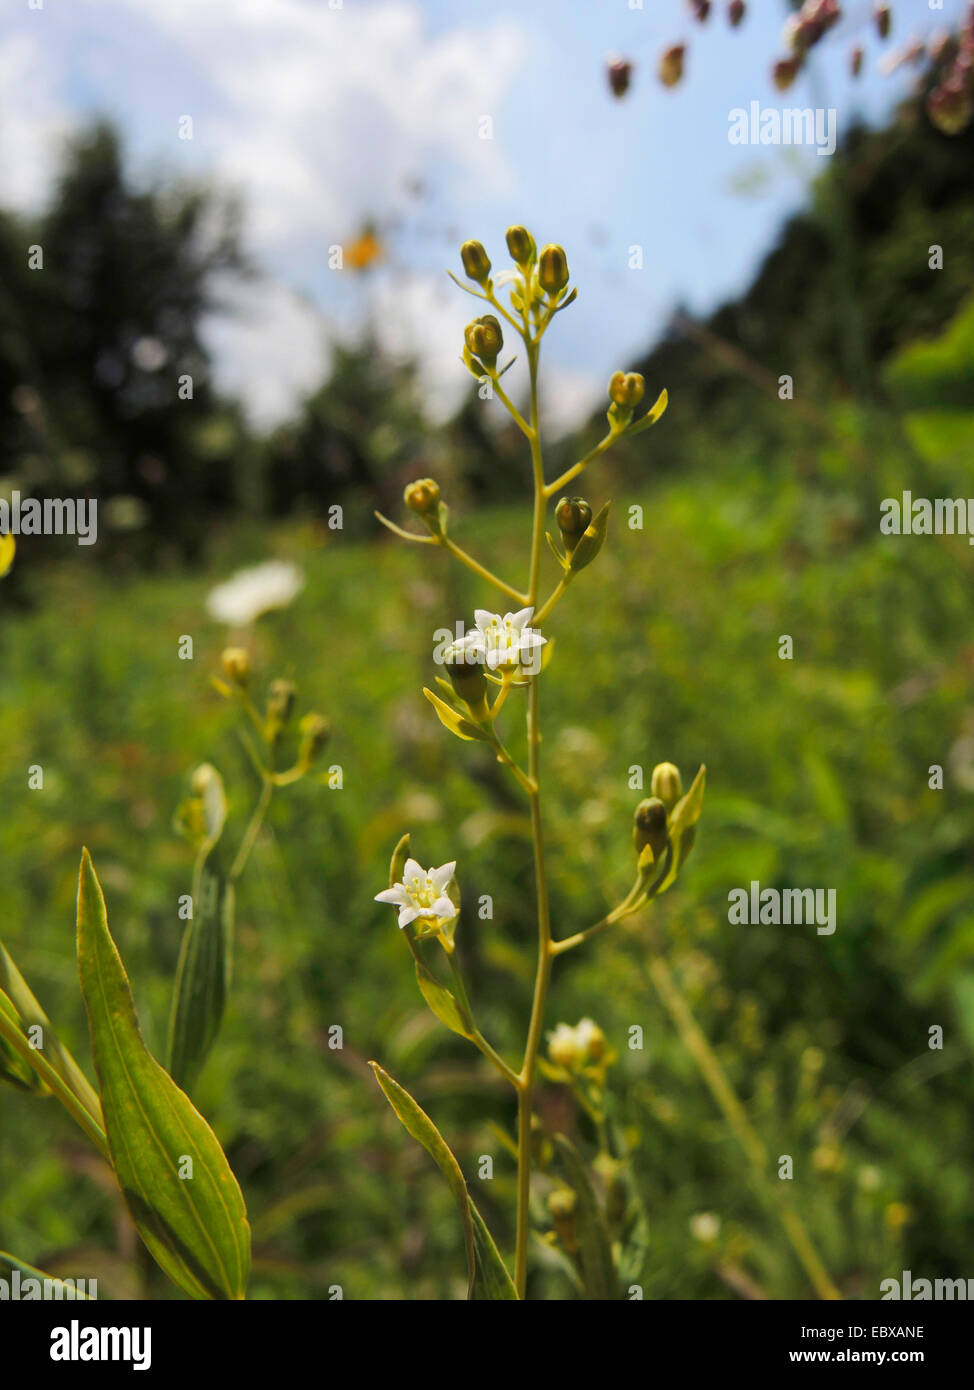 Thesium (Thesium bavarum), blooming in a meadow, Germany, Baden-Wuerttemberg Stock Photo